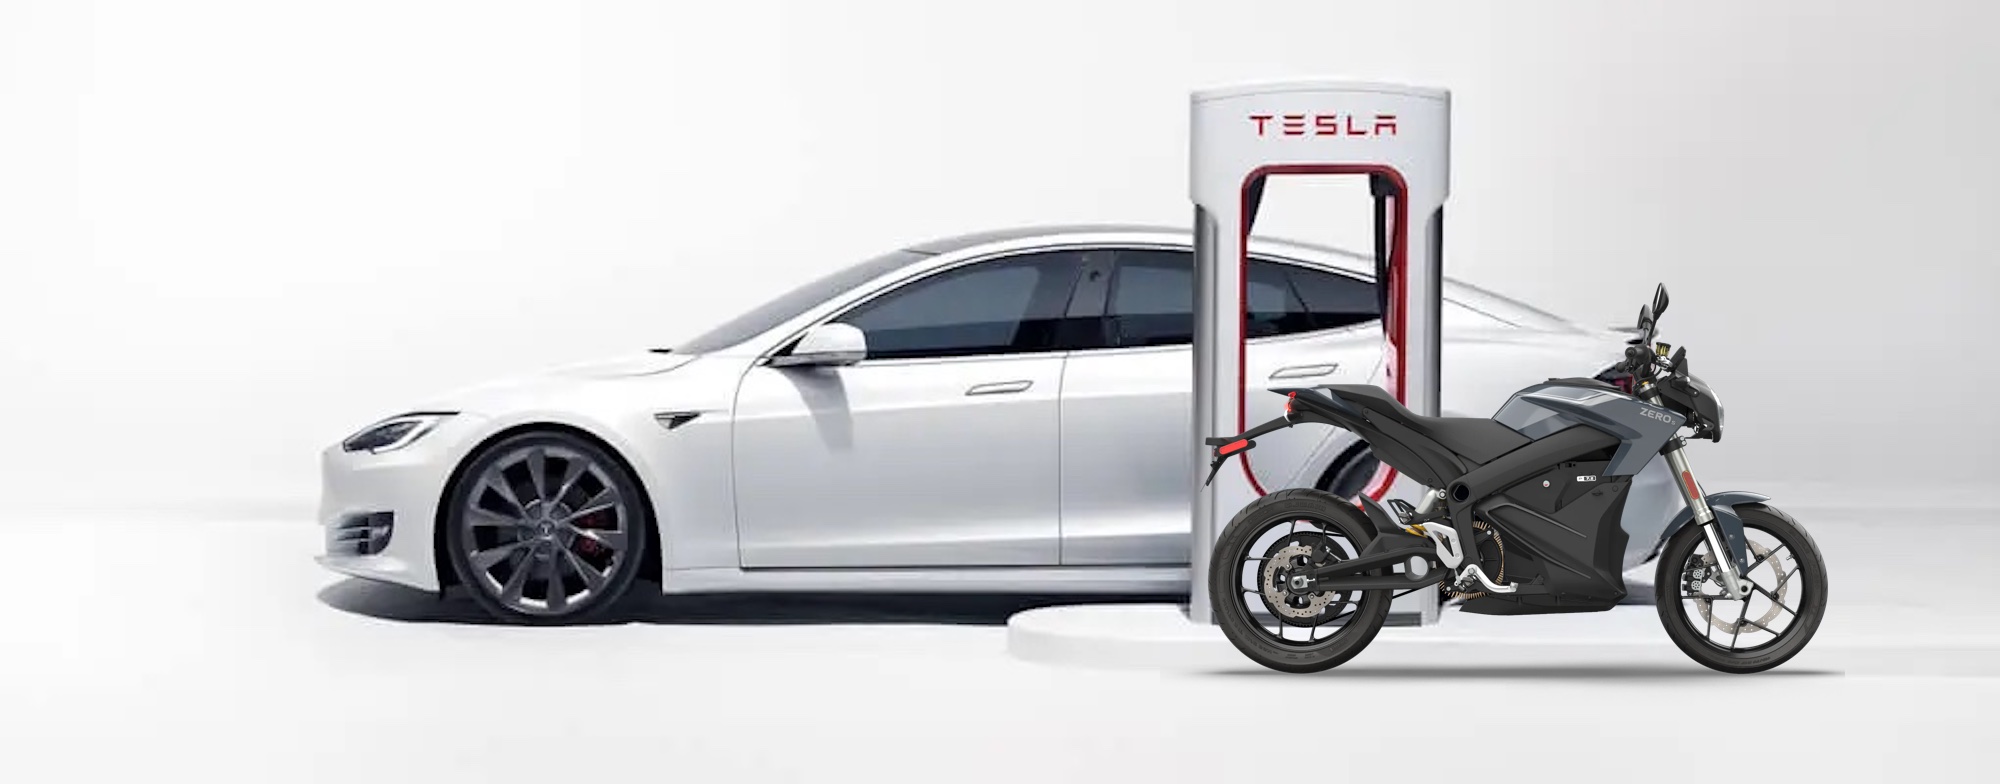 A Zero motorcycle next to a Tesla Supercharger station. Media sourced from Zero Motorcycles and Solar Reviews.